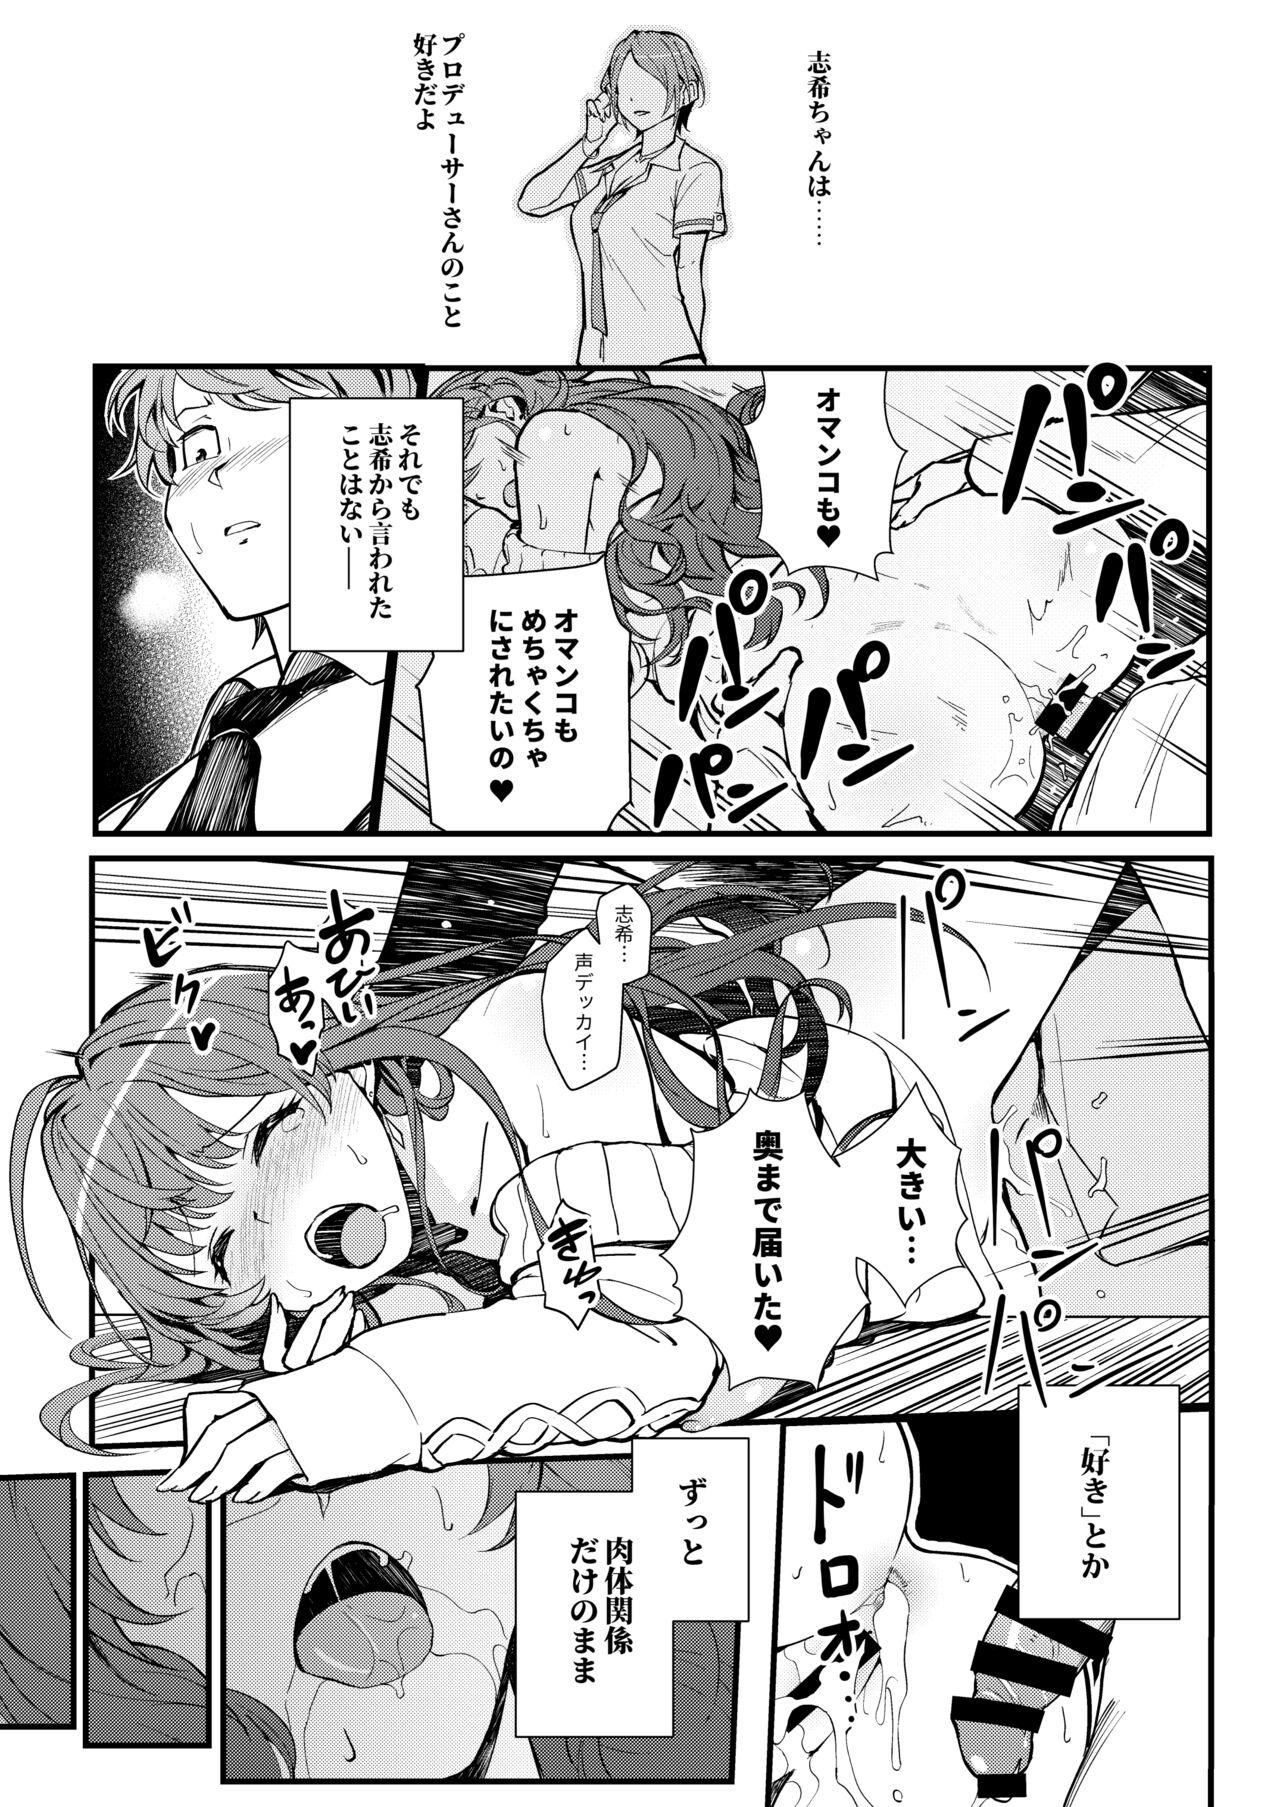 Outside Das Parfum 2 - The idolmaster Culote - Page 8